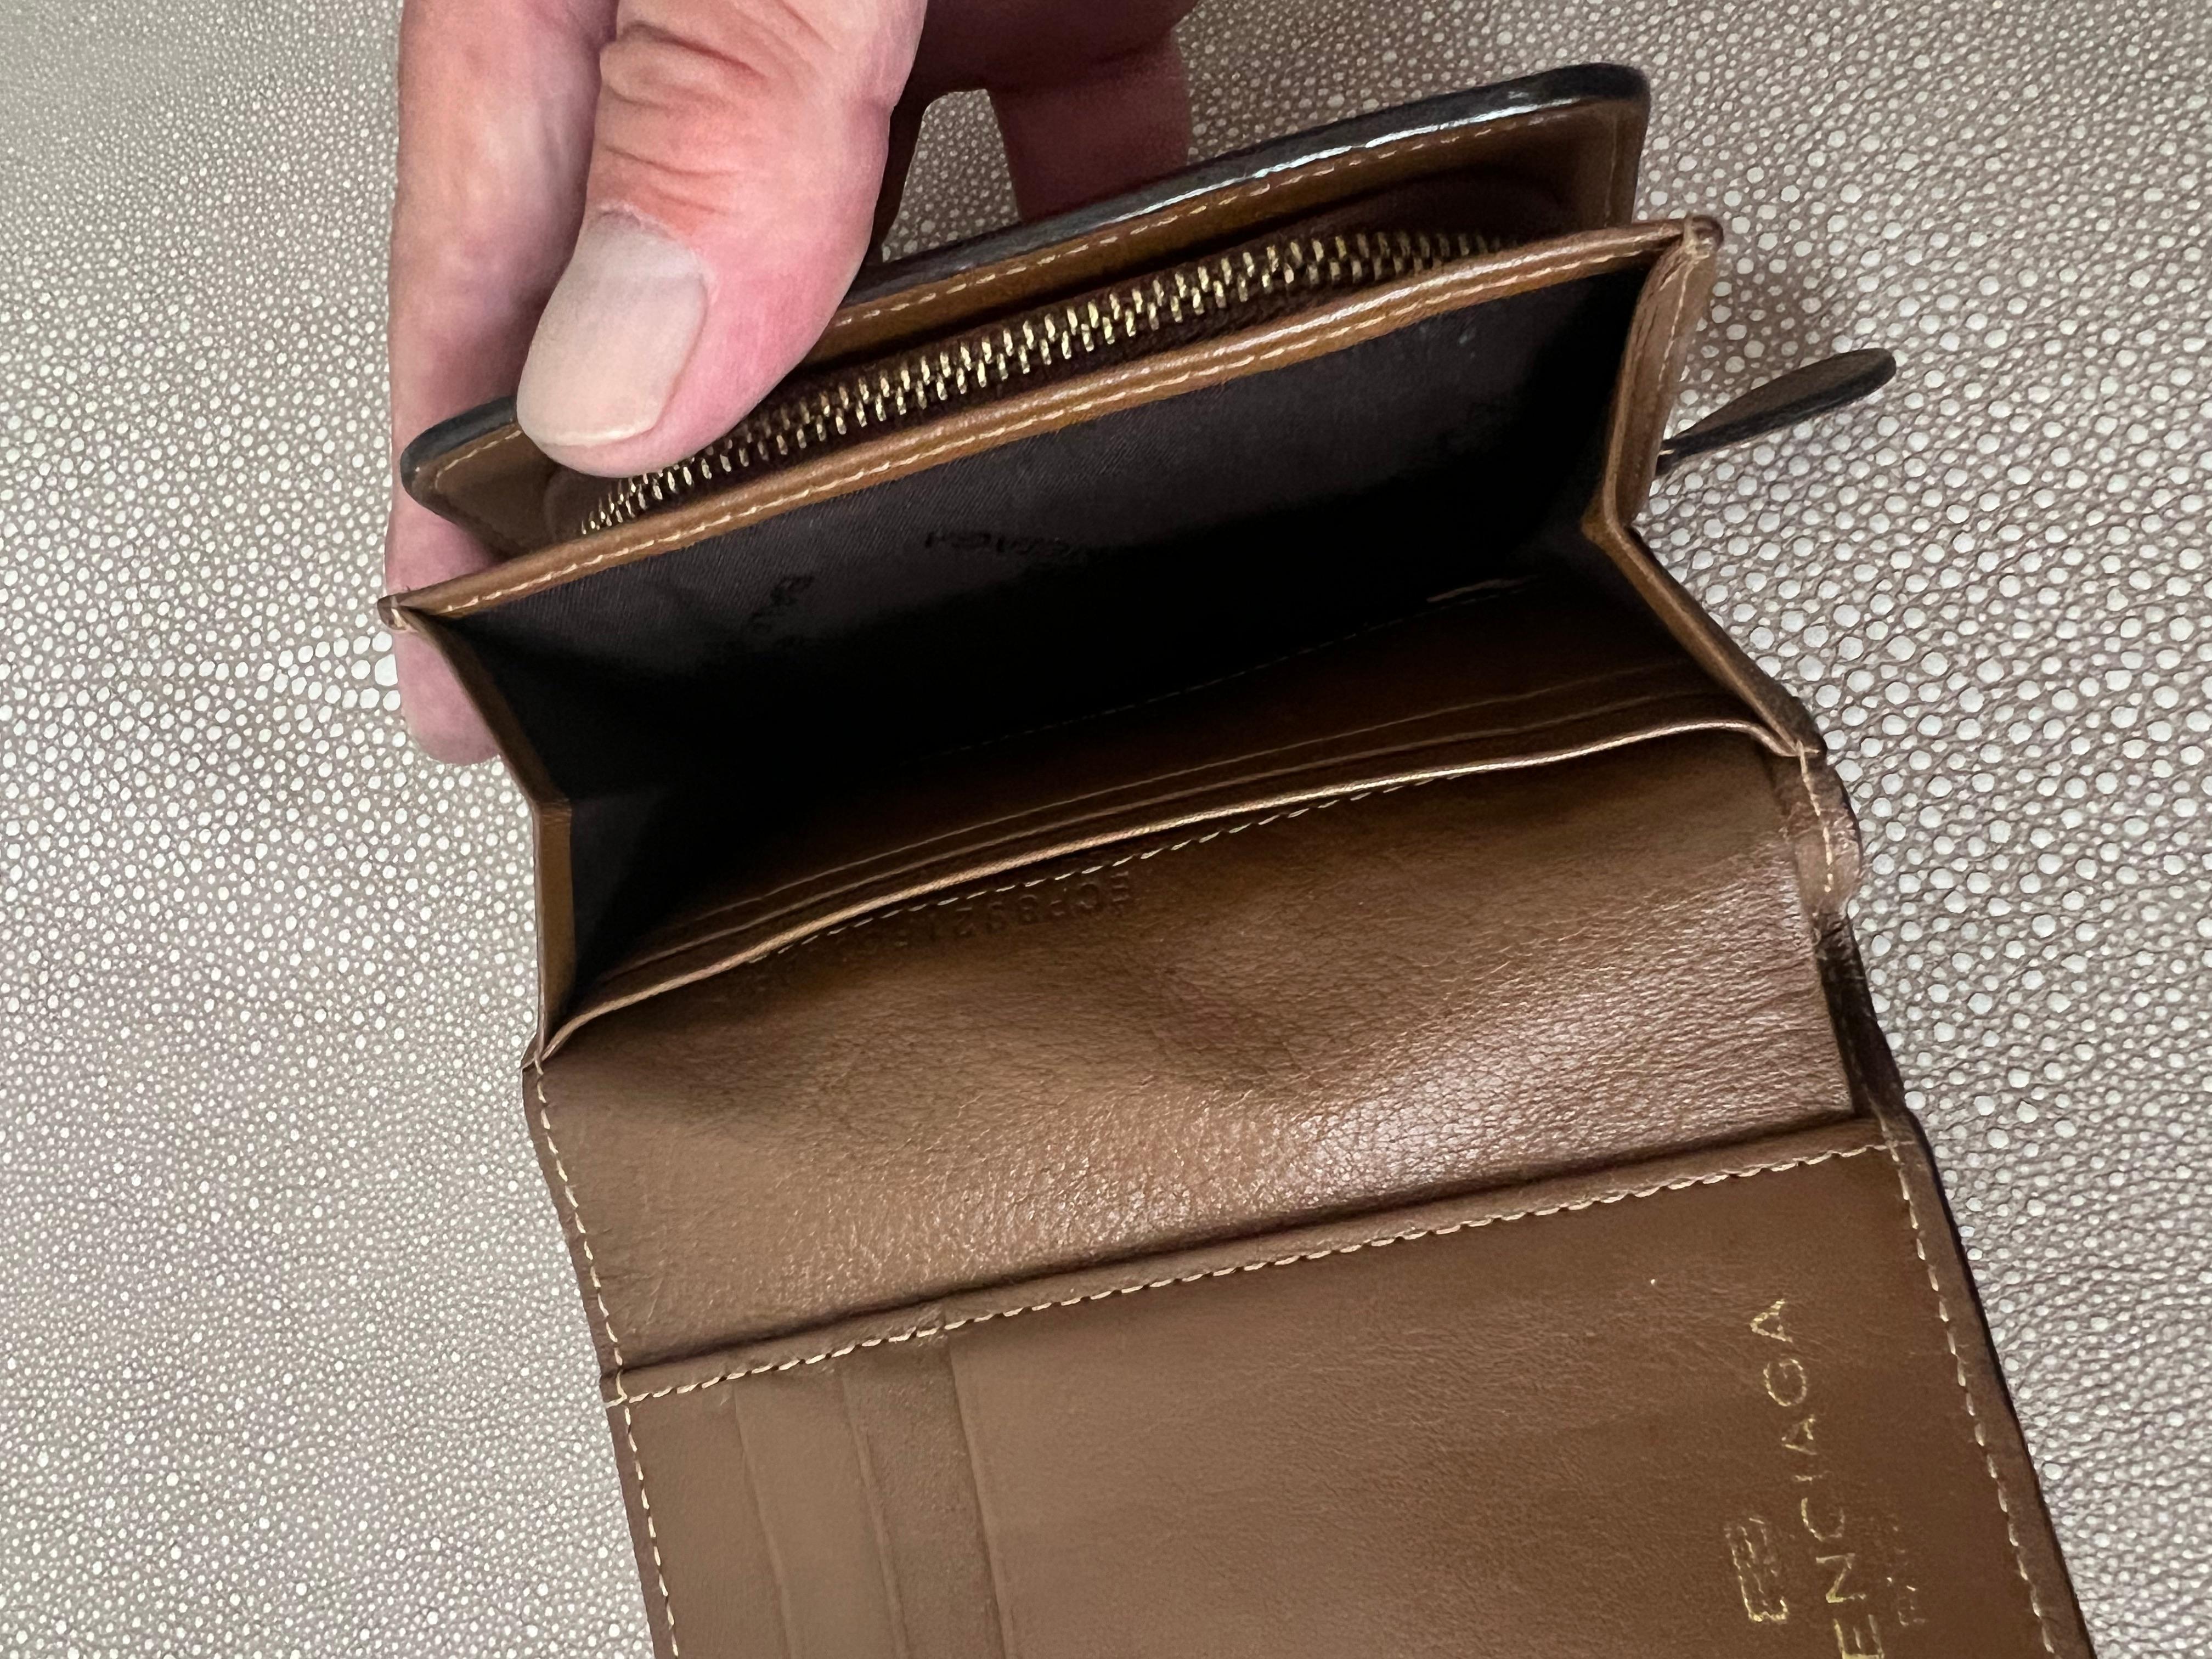 Patinated Duo Fold Balenciaga Wallet With Brass Closure For Sale